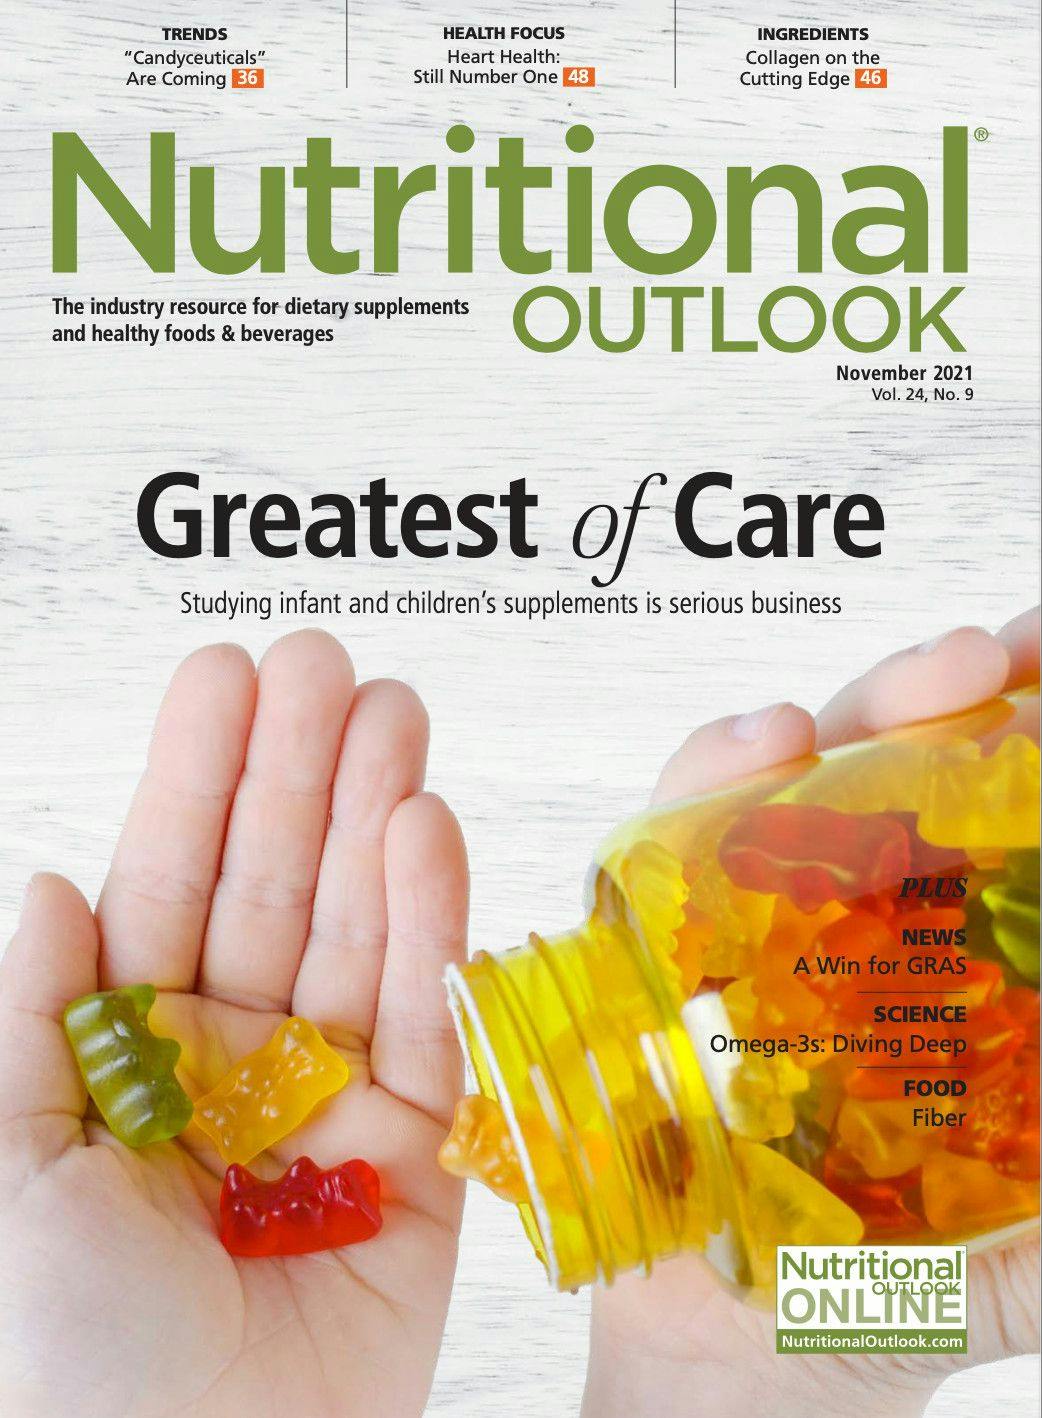 Nutritional Outlook Vol. 24 No. 9